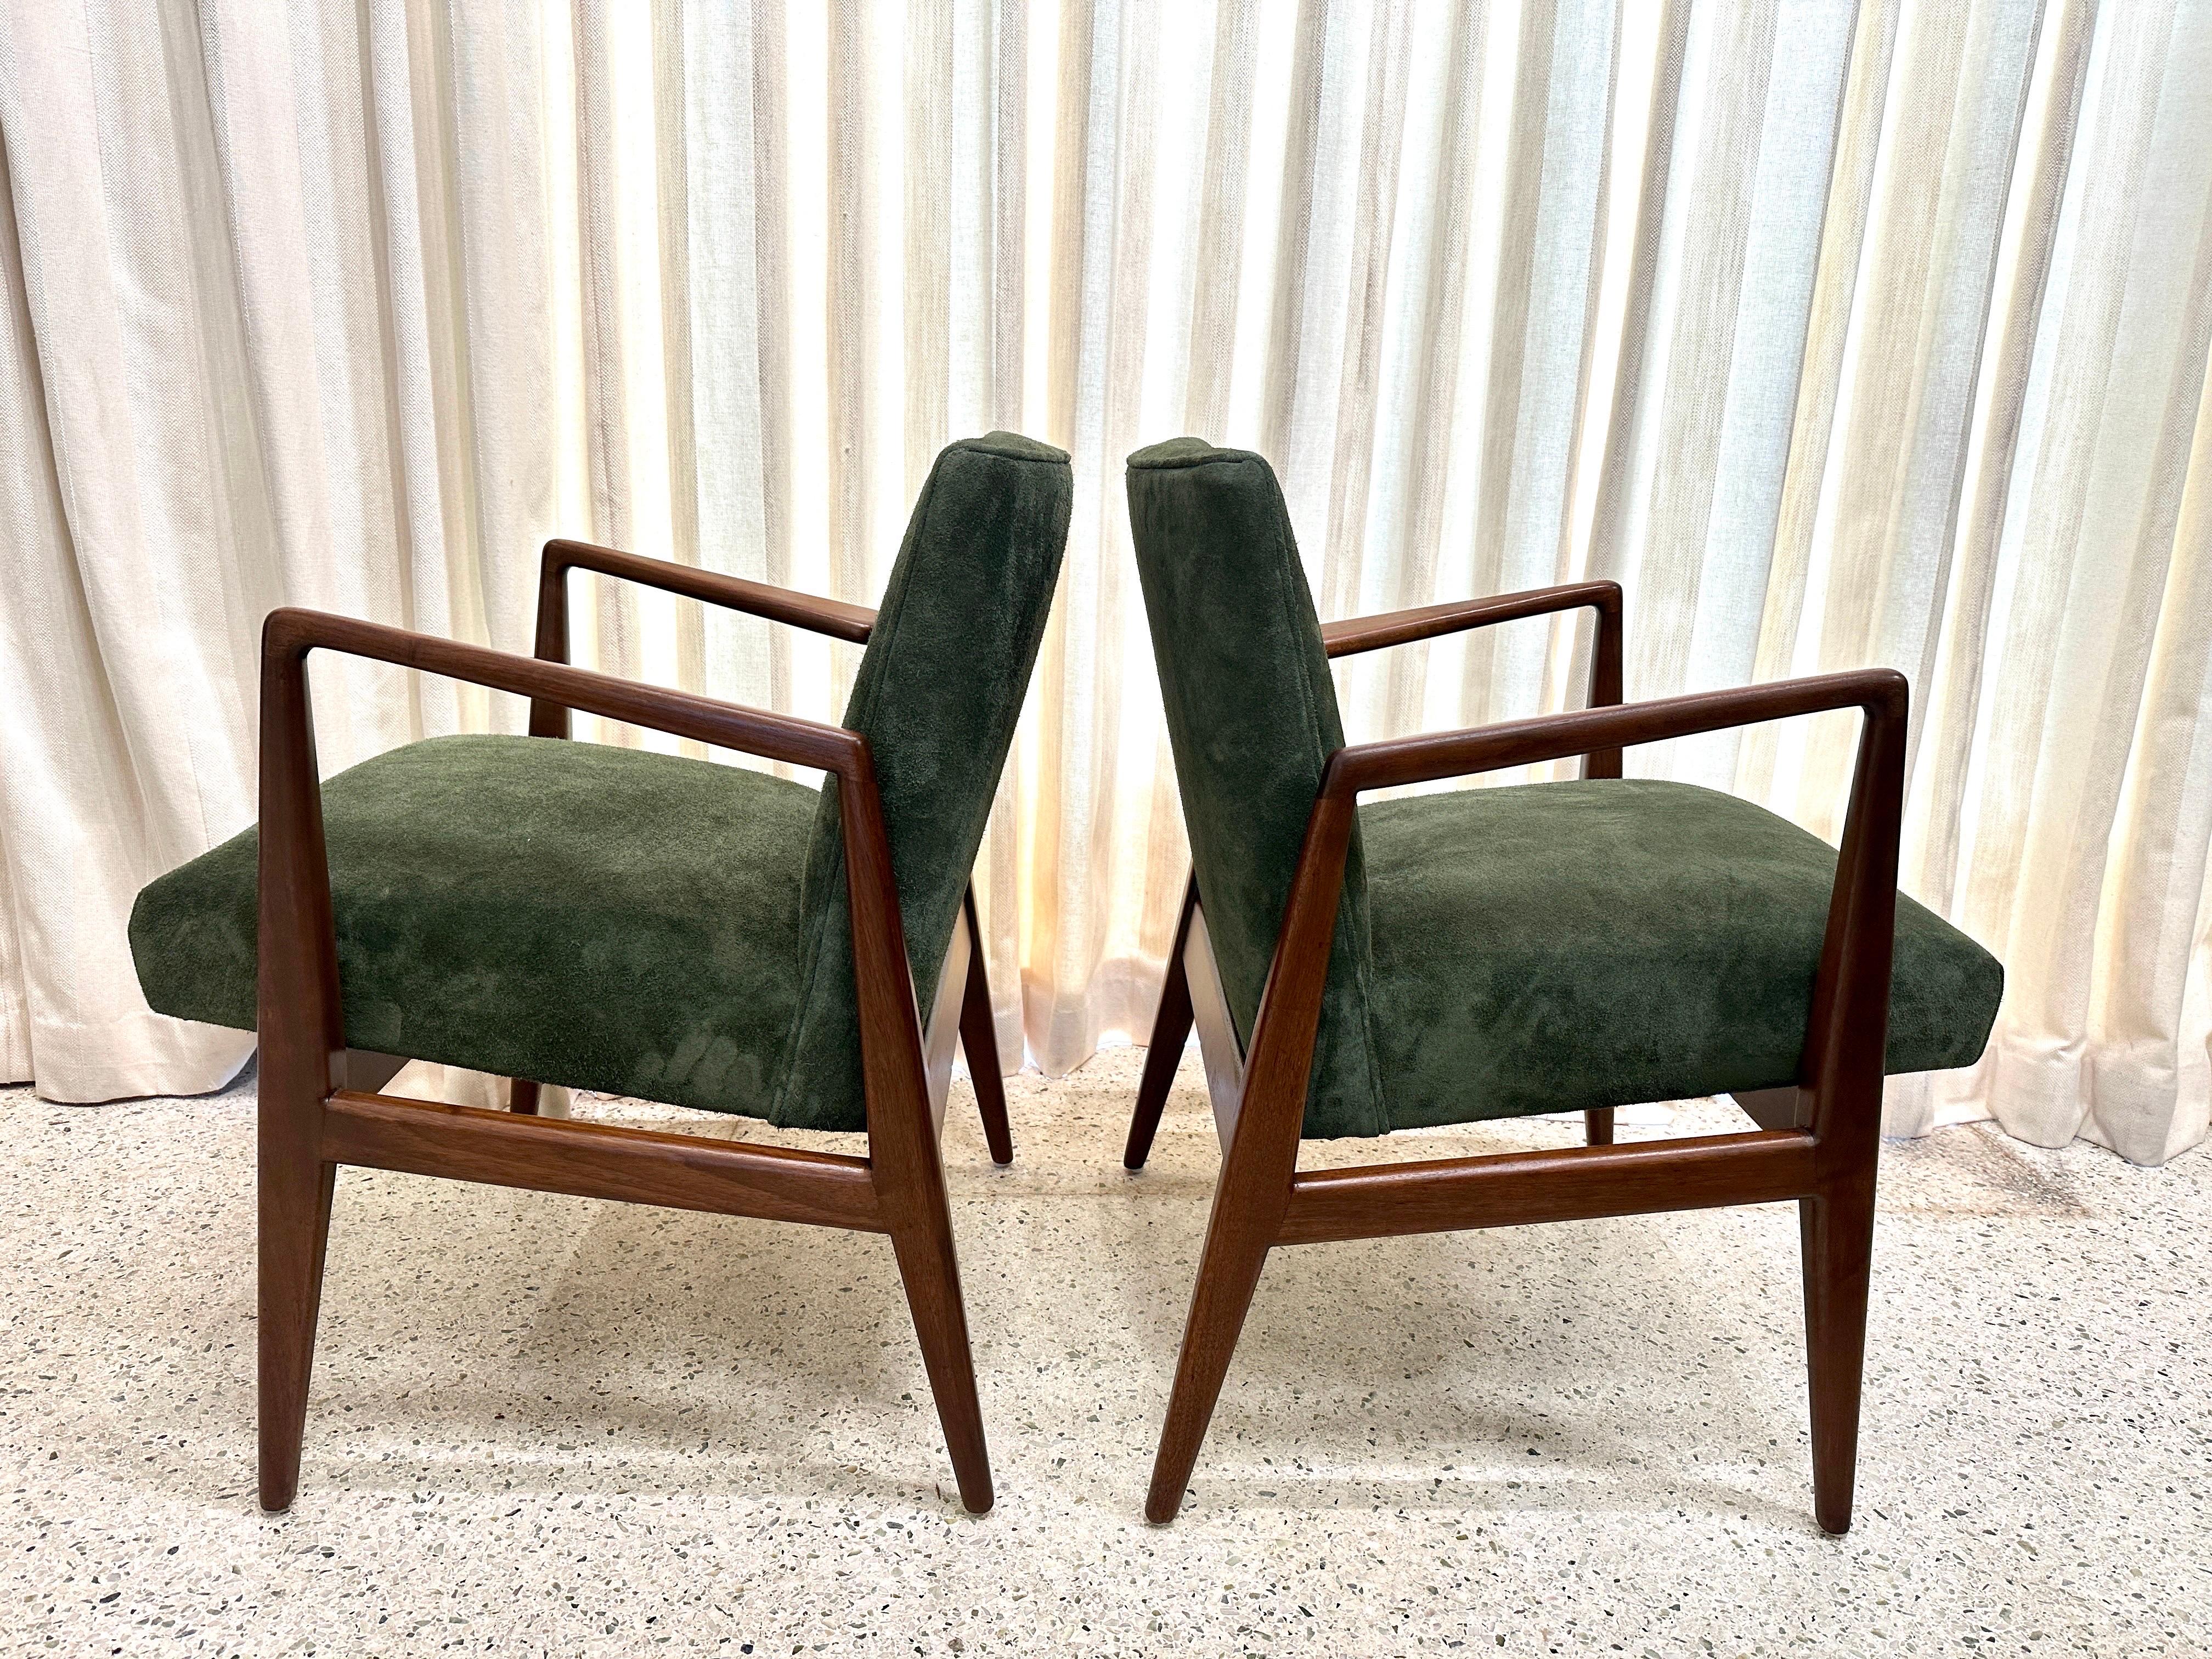 Original Vintage Jens Risom Armchairs in Green Suede w/ Label, PAIR For Sale 5